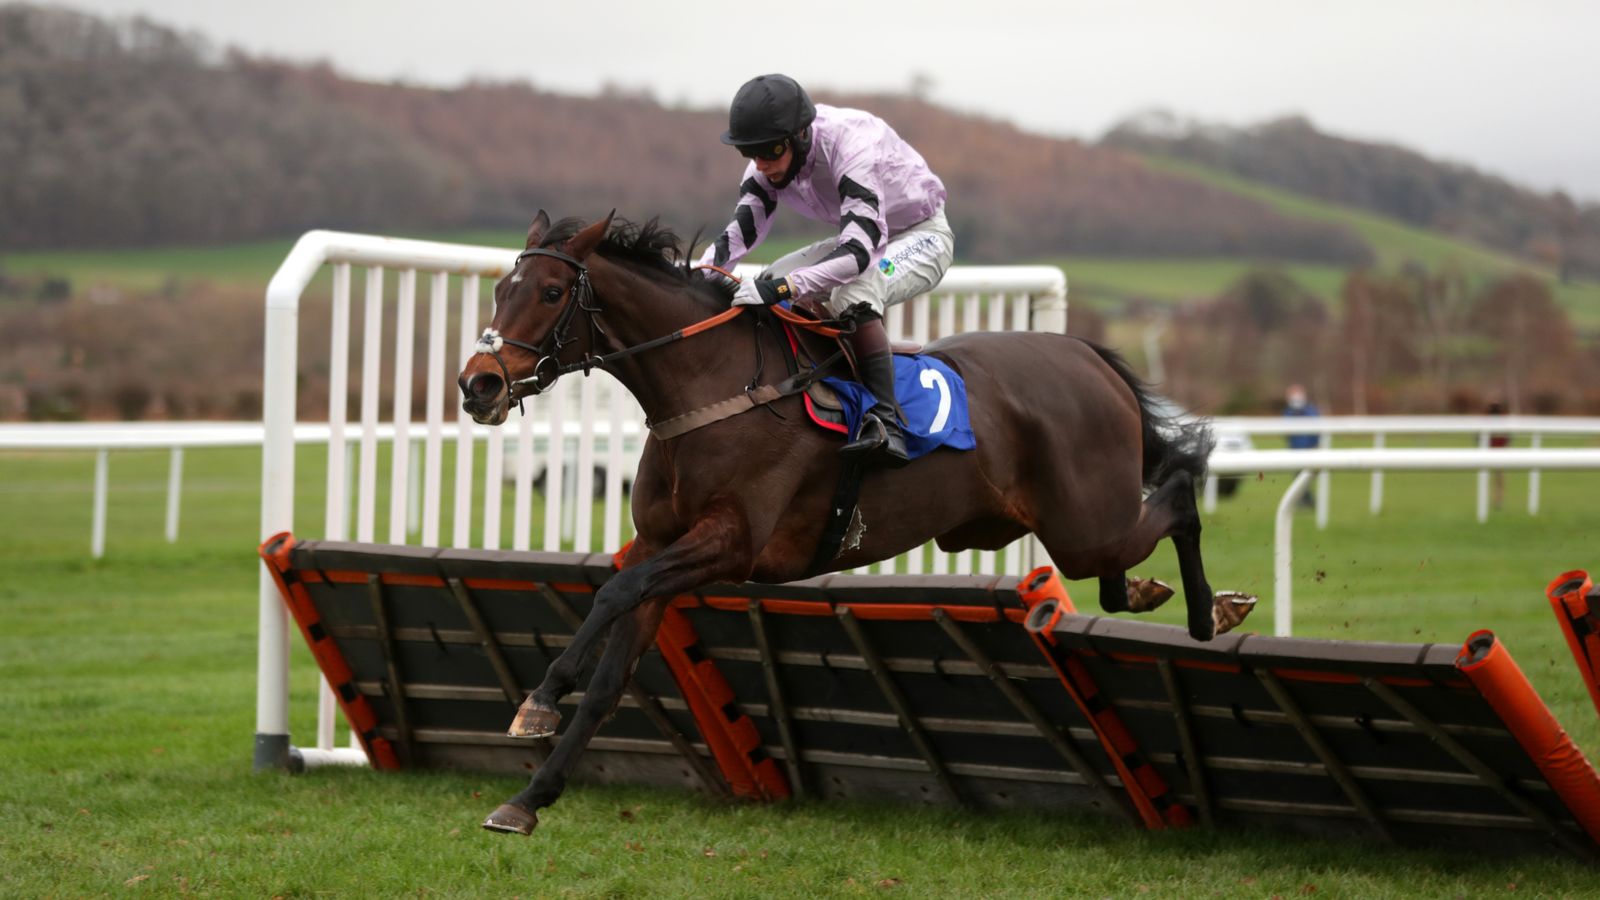 Long Walk Hurdle: Miranda set to step up in class at Ascot for Paul Nicholls and Owners Group syndicate